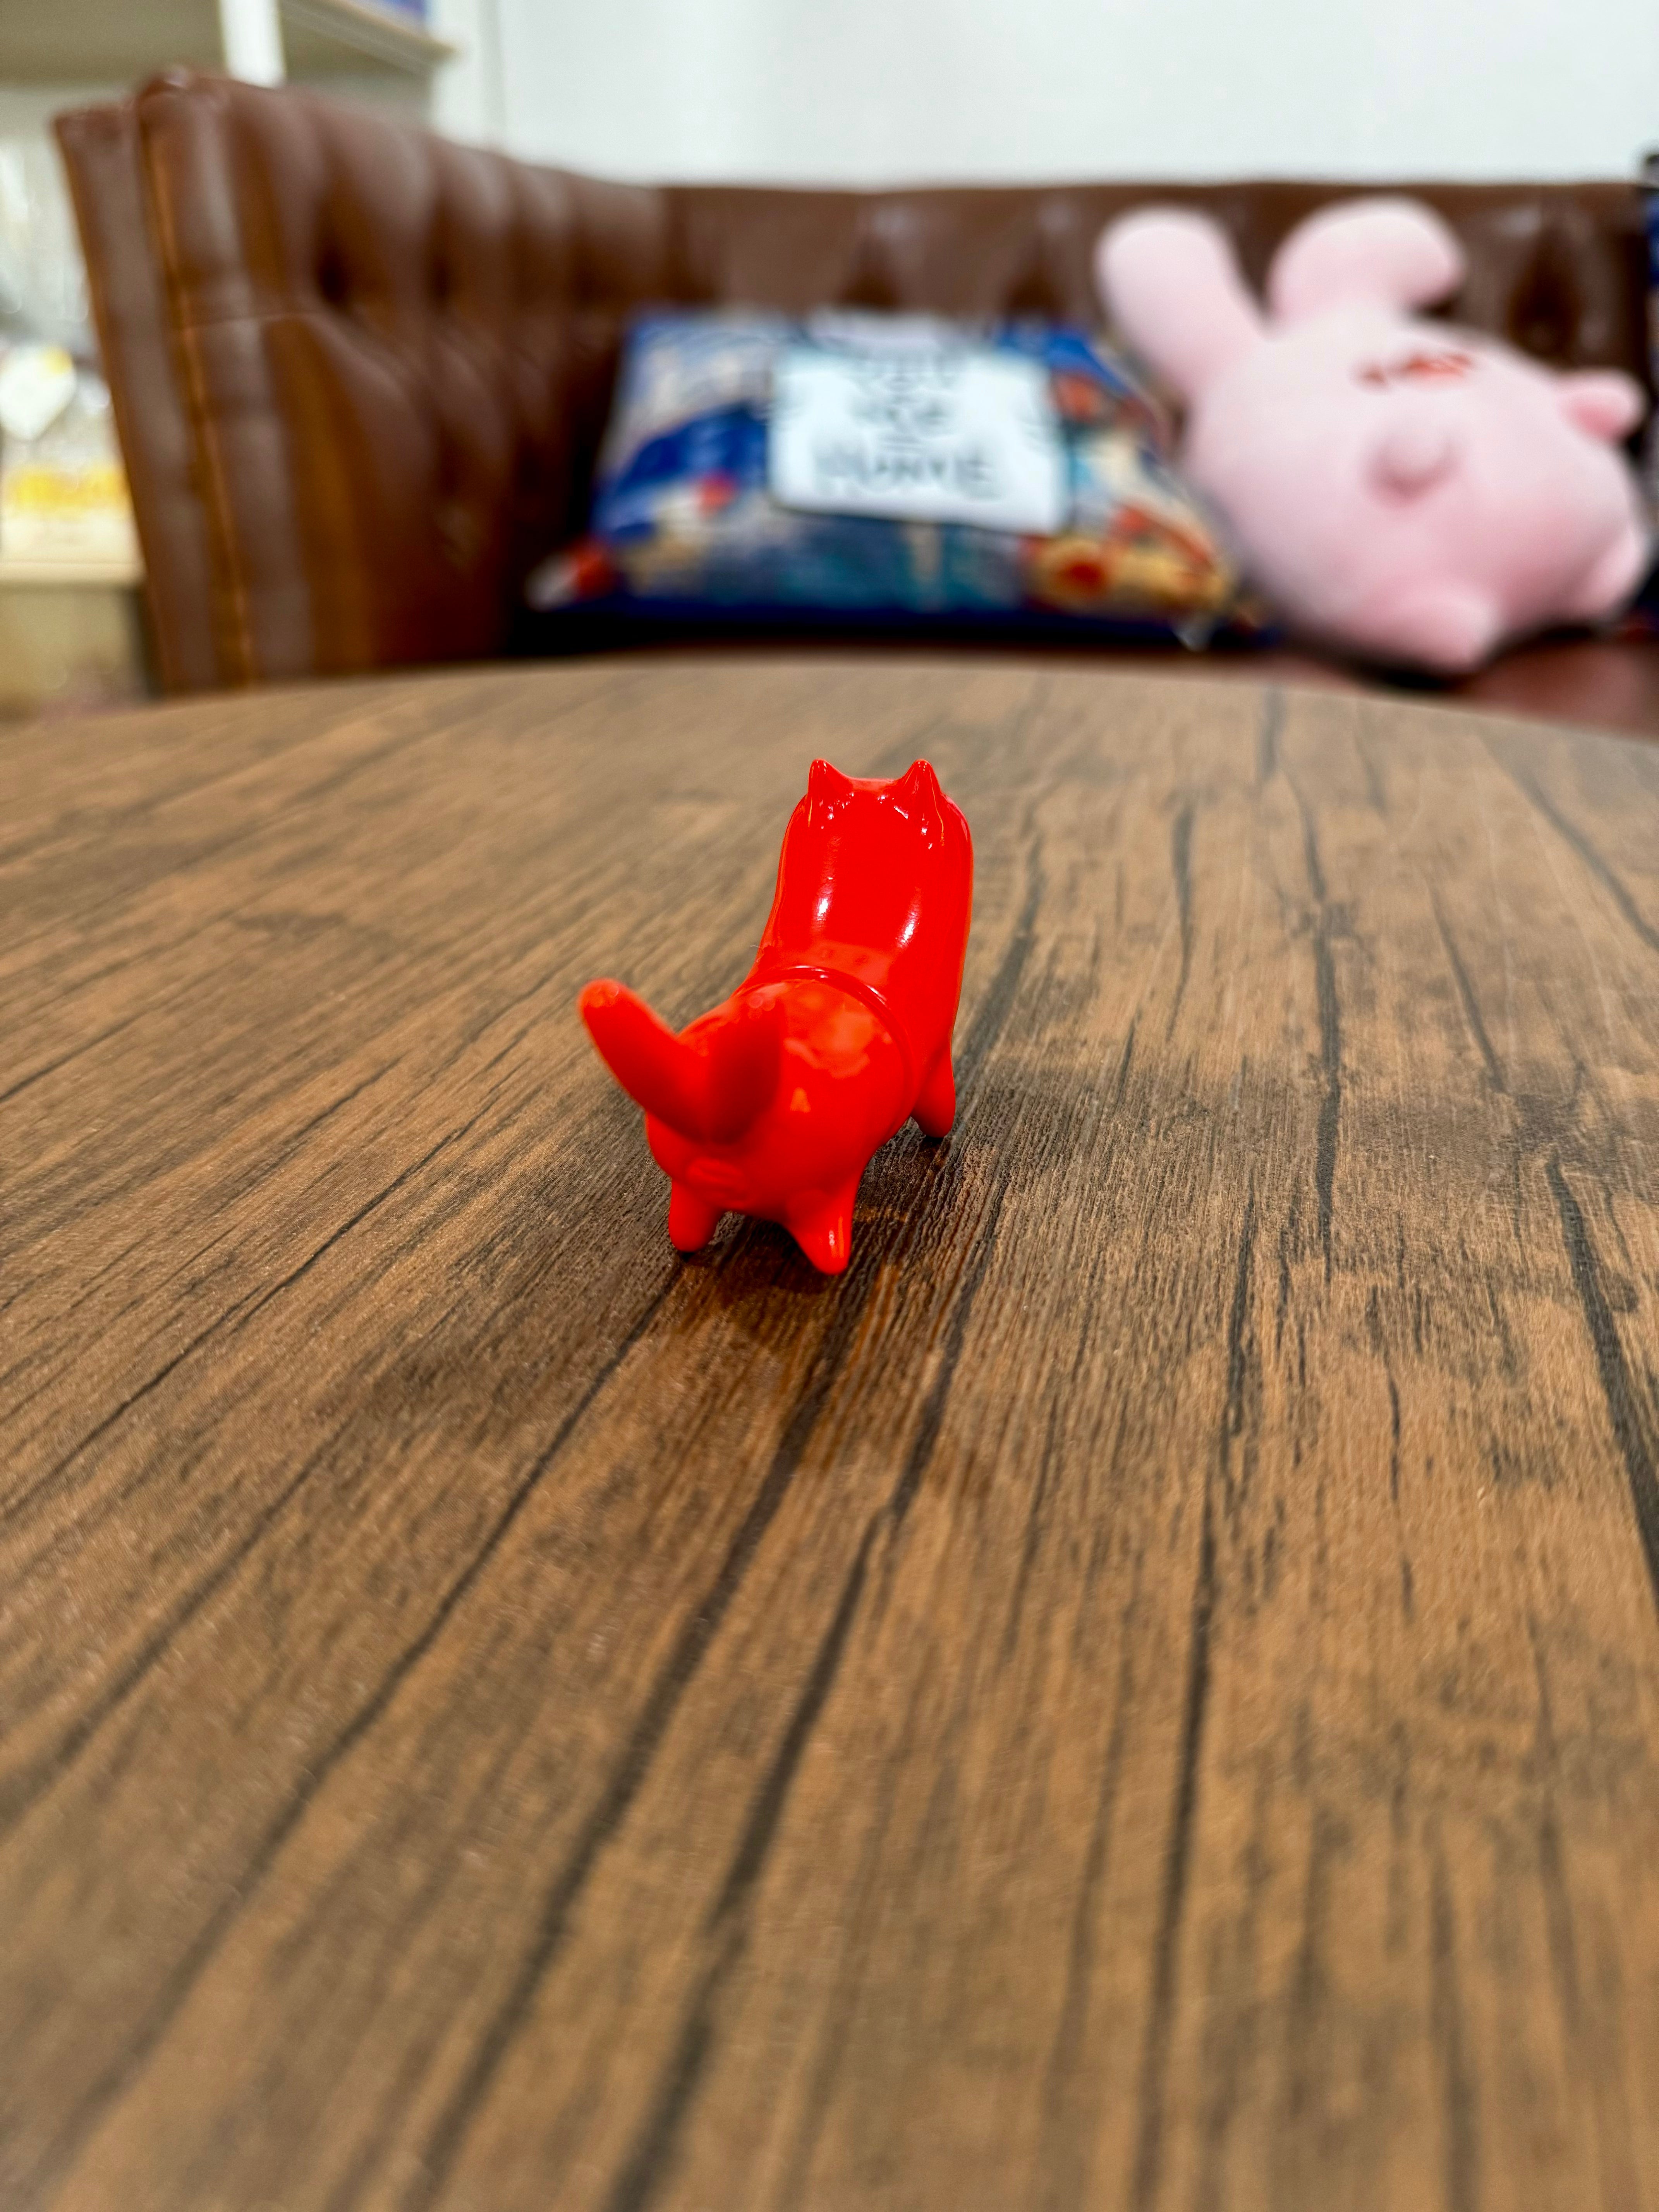 A small red toy cat, Nukomata - Red Sausage by YASU, on a table. Indoor toy with a wooden floor. Reflects Strangecat Toys' blind box and art toy store essence.